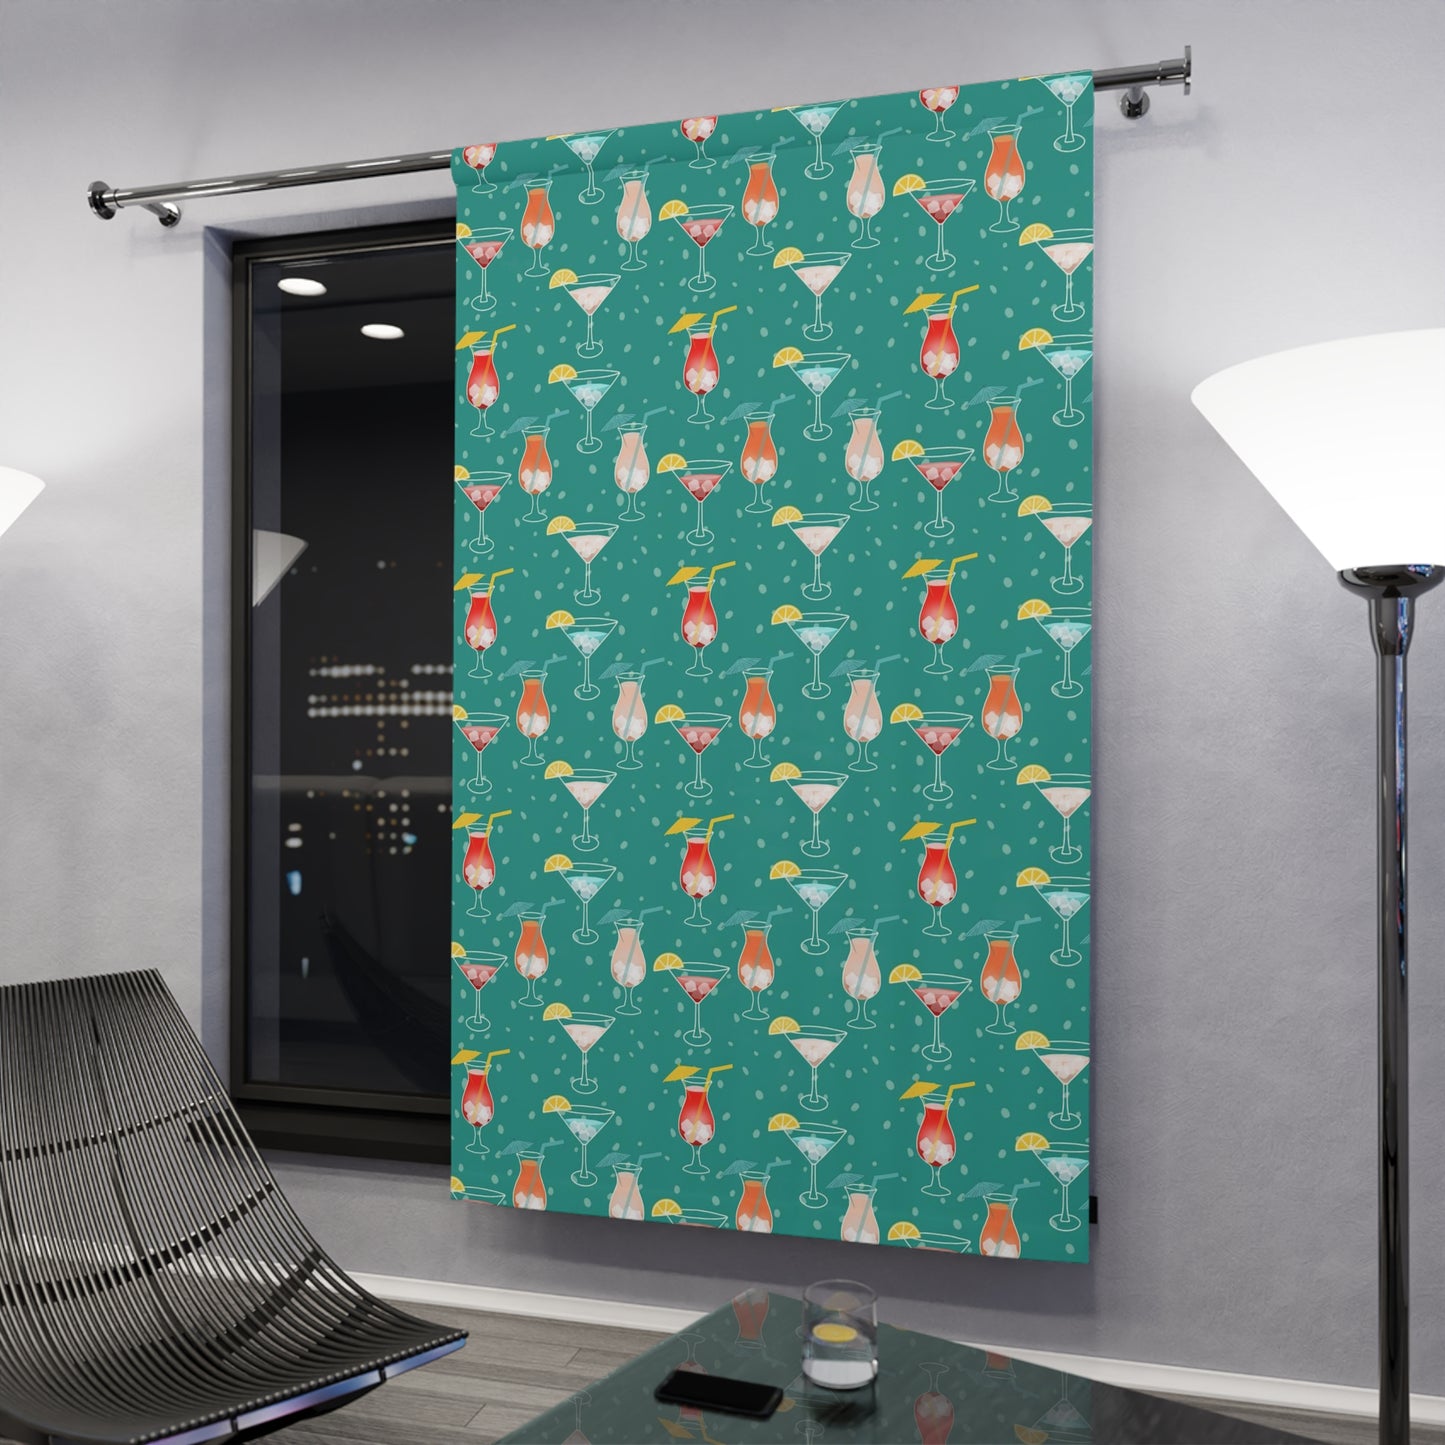 Cocktails Blackout Curtain Panel - Vibrant Cocktail Design with Lemon Slices, Umbrellas, and Colorful Straws